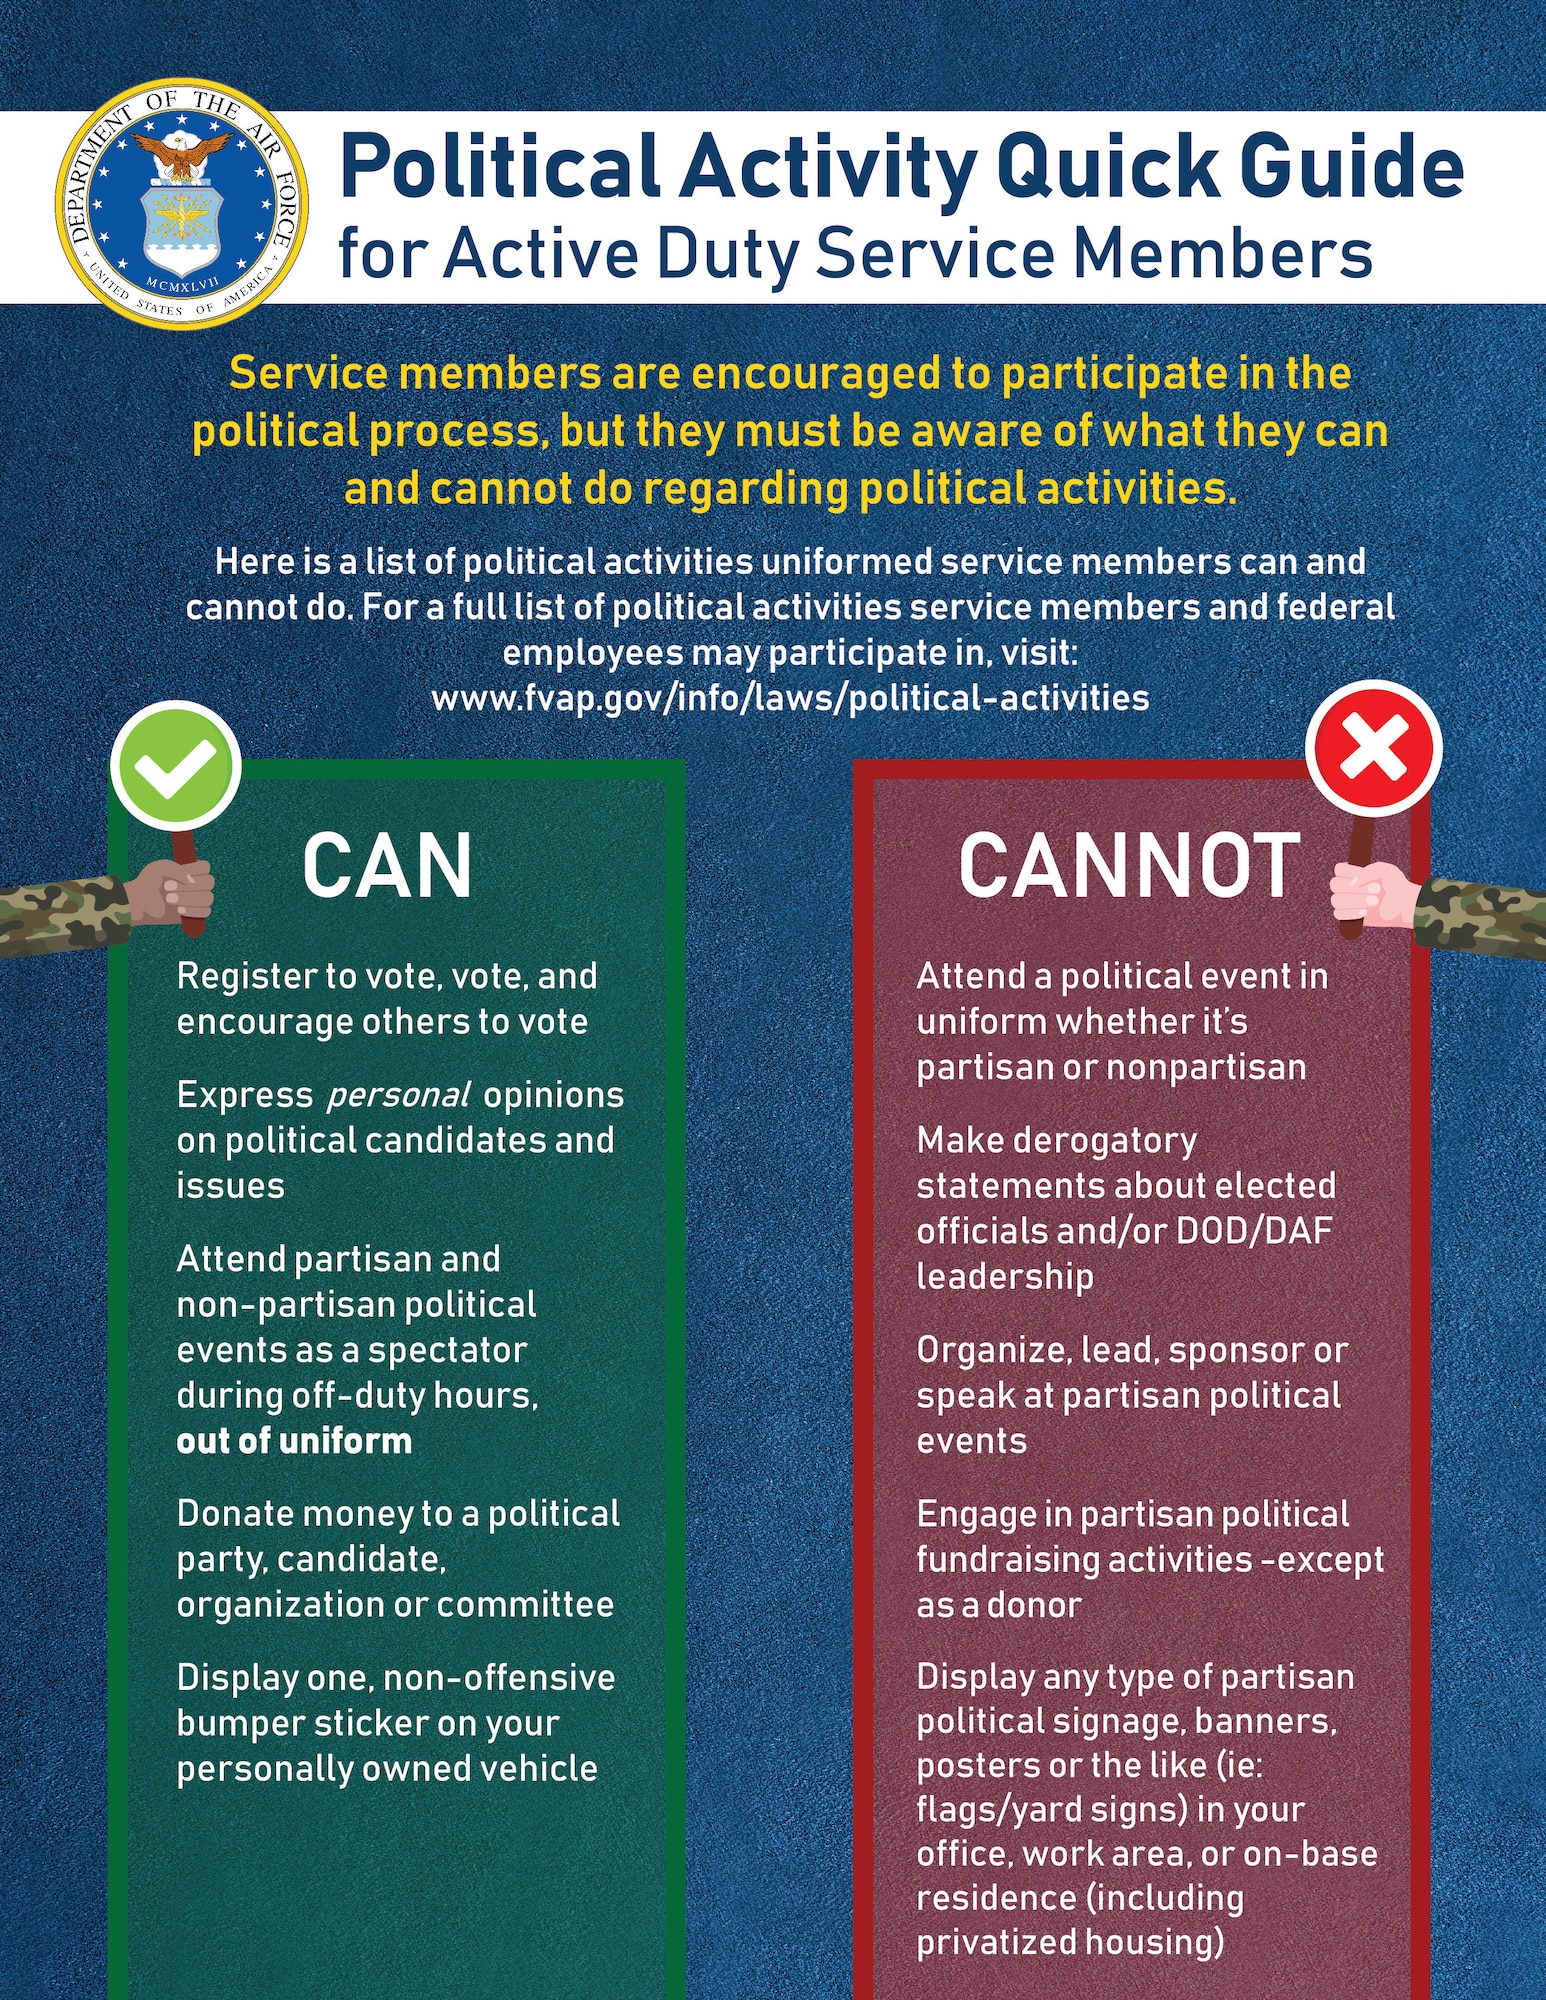 Political Activity Quick Guide for active duty service members.